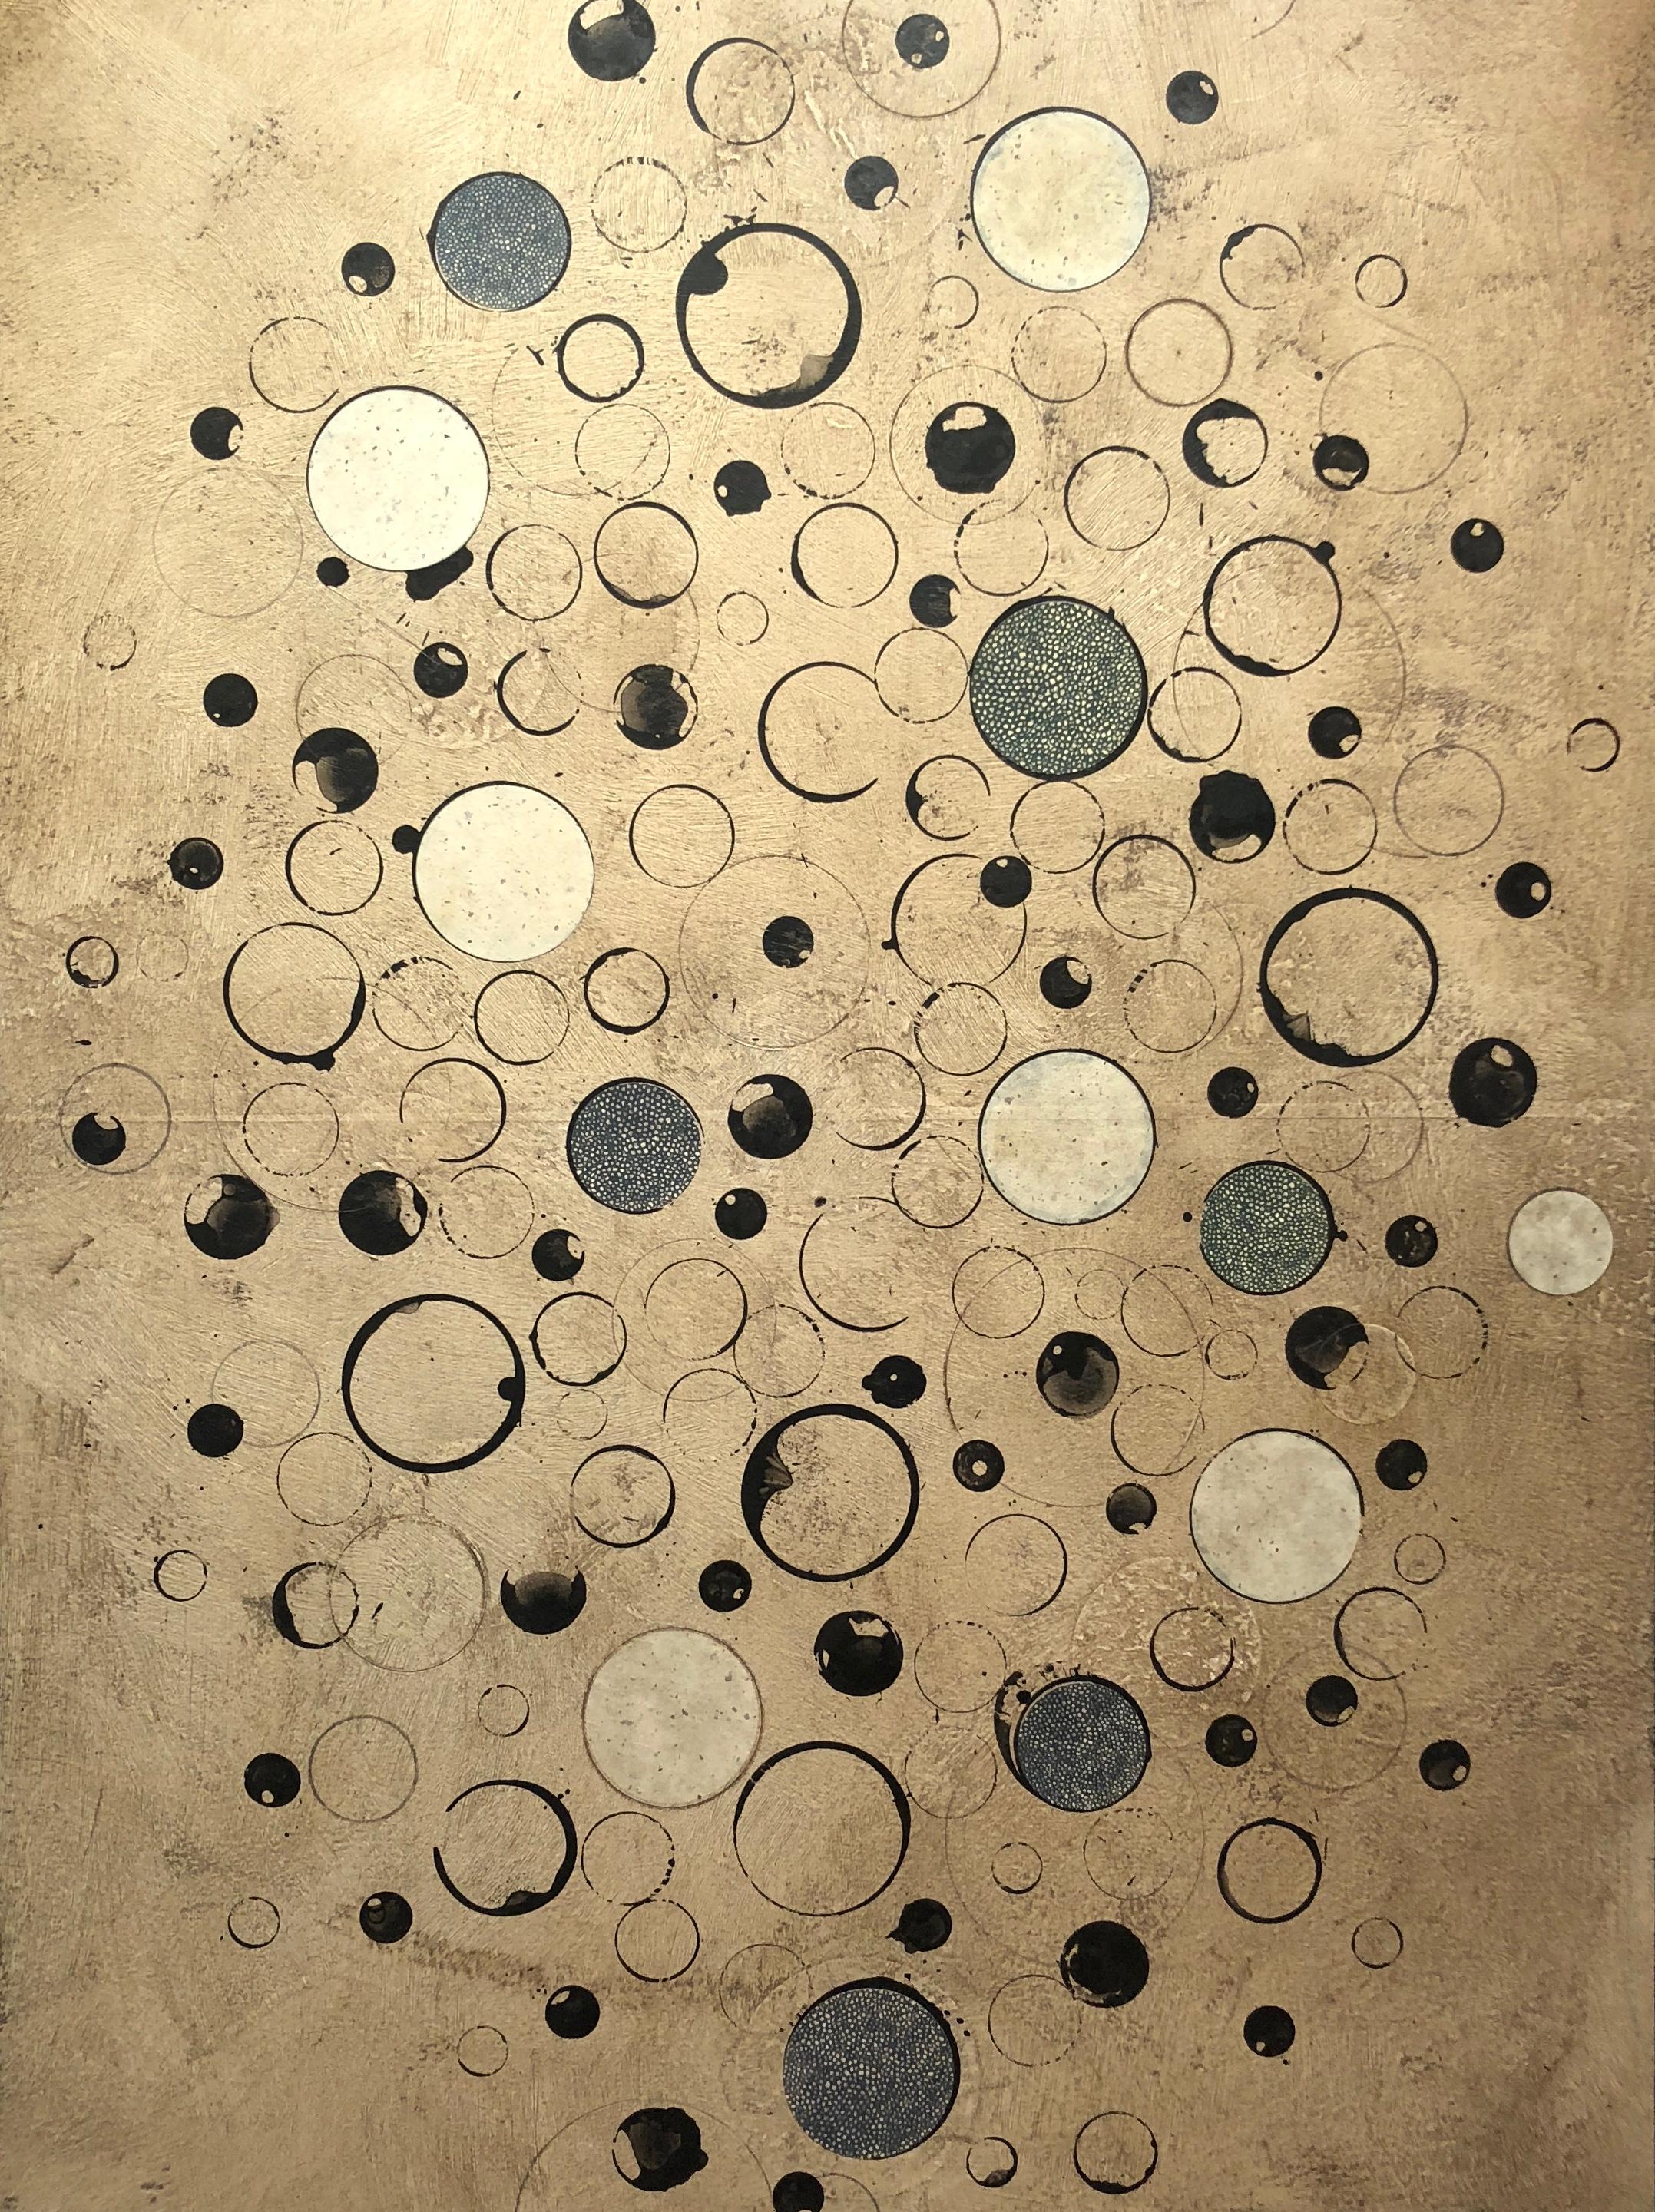 Dan Rizzie Abstract Painting - DAN RIZZIE "Rain" mixed media abstract painting w circles